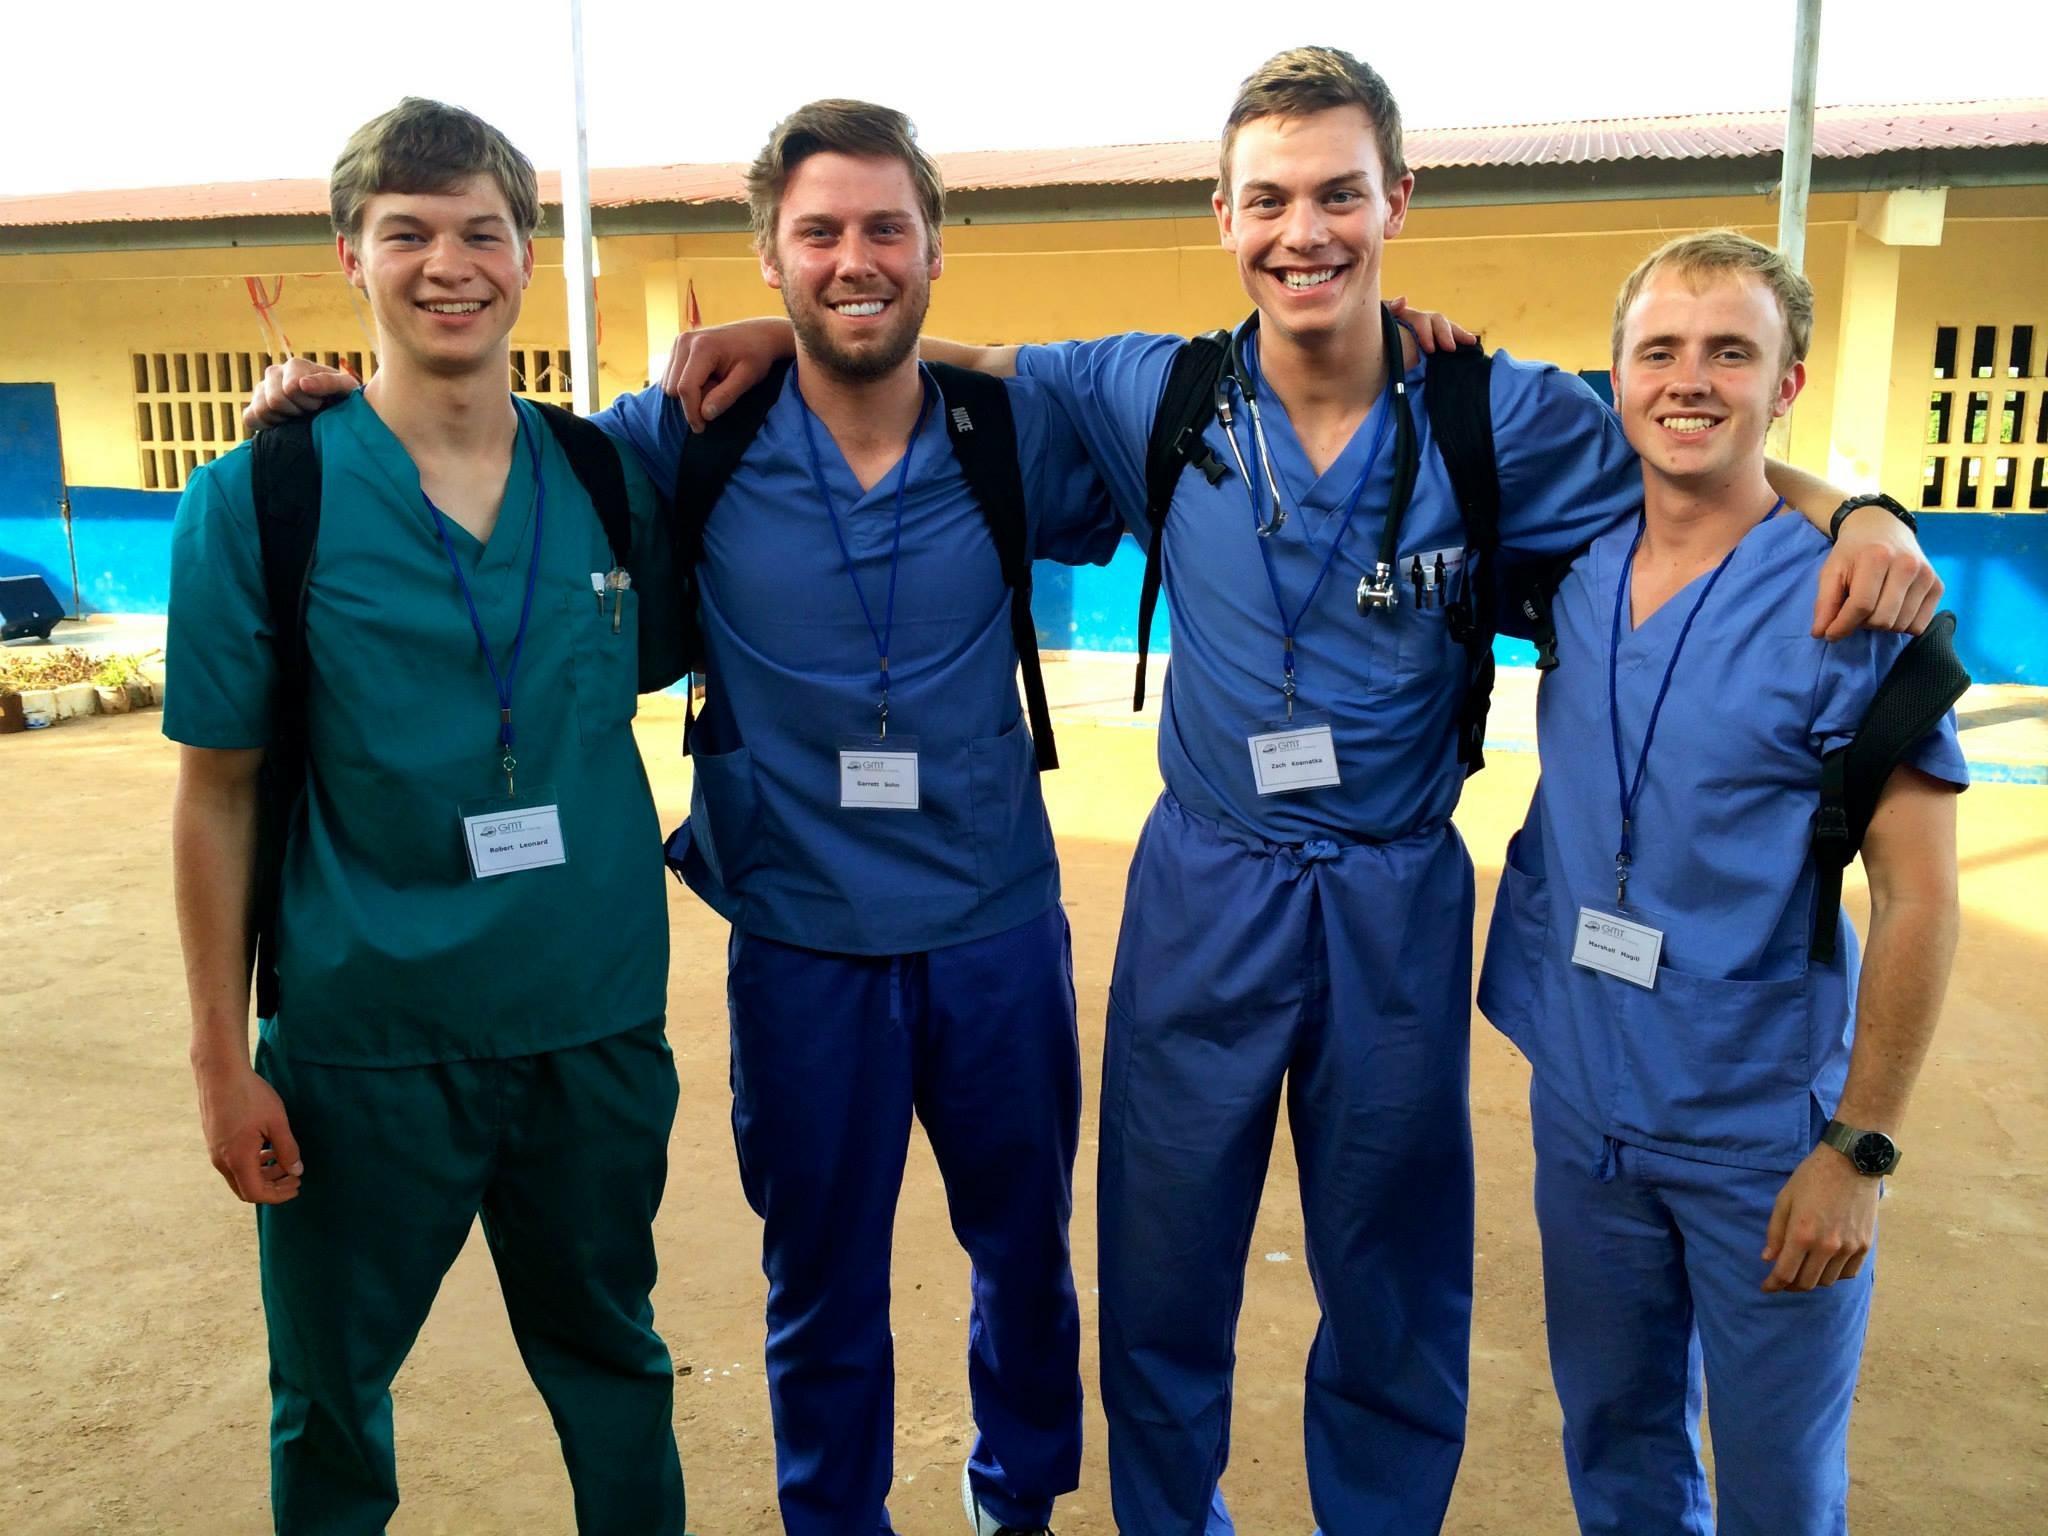 The+TCU+chapter+of+the+Global+Medical+Training+program+has+re-inspired+future+doctors+by+sending+80+students+on+five+different+medical+mission+trips.